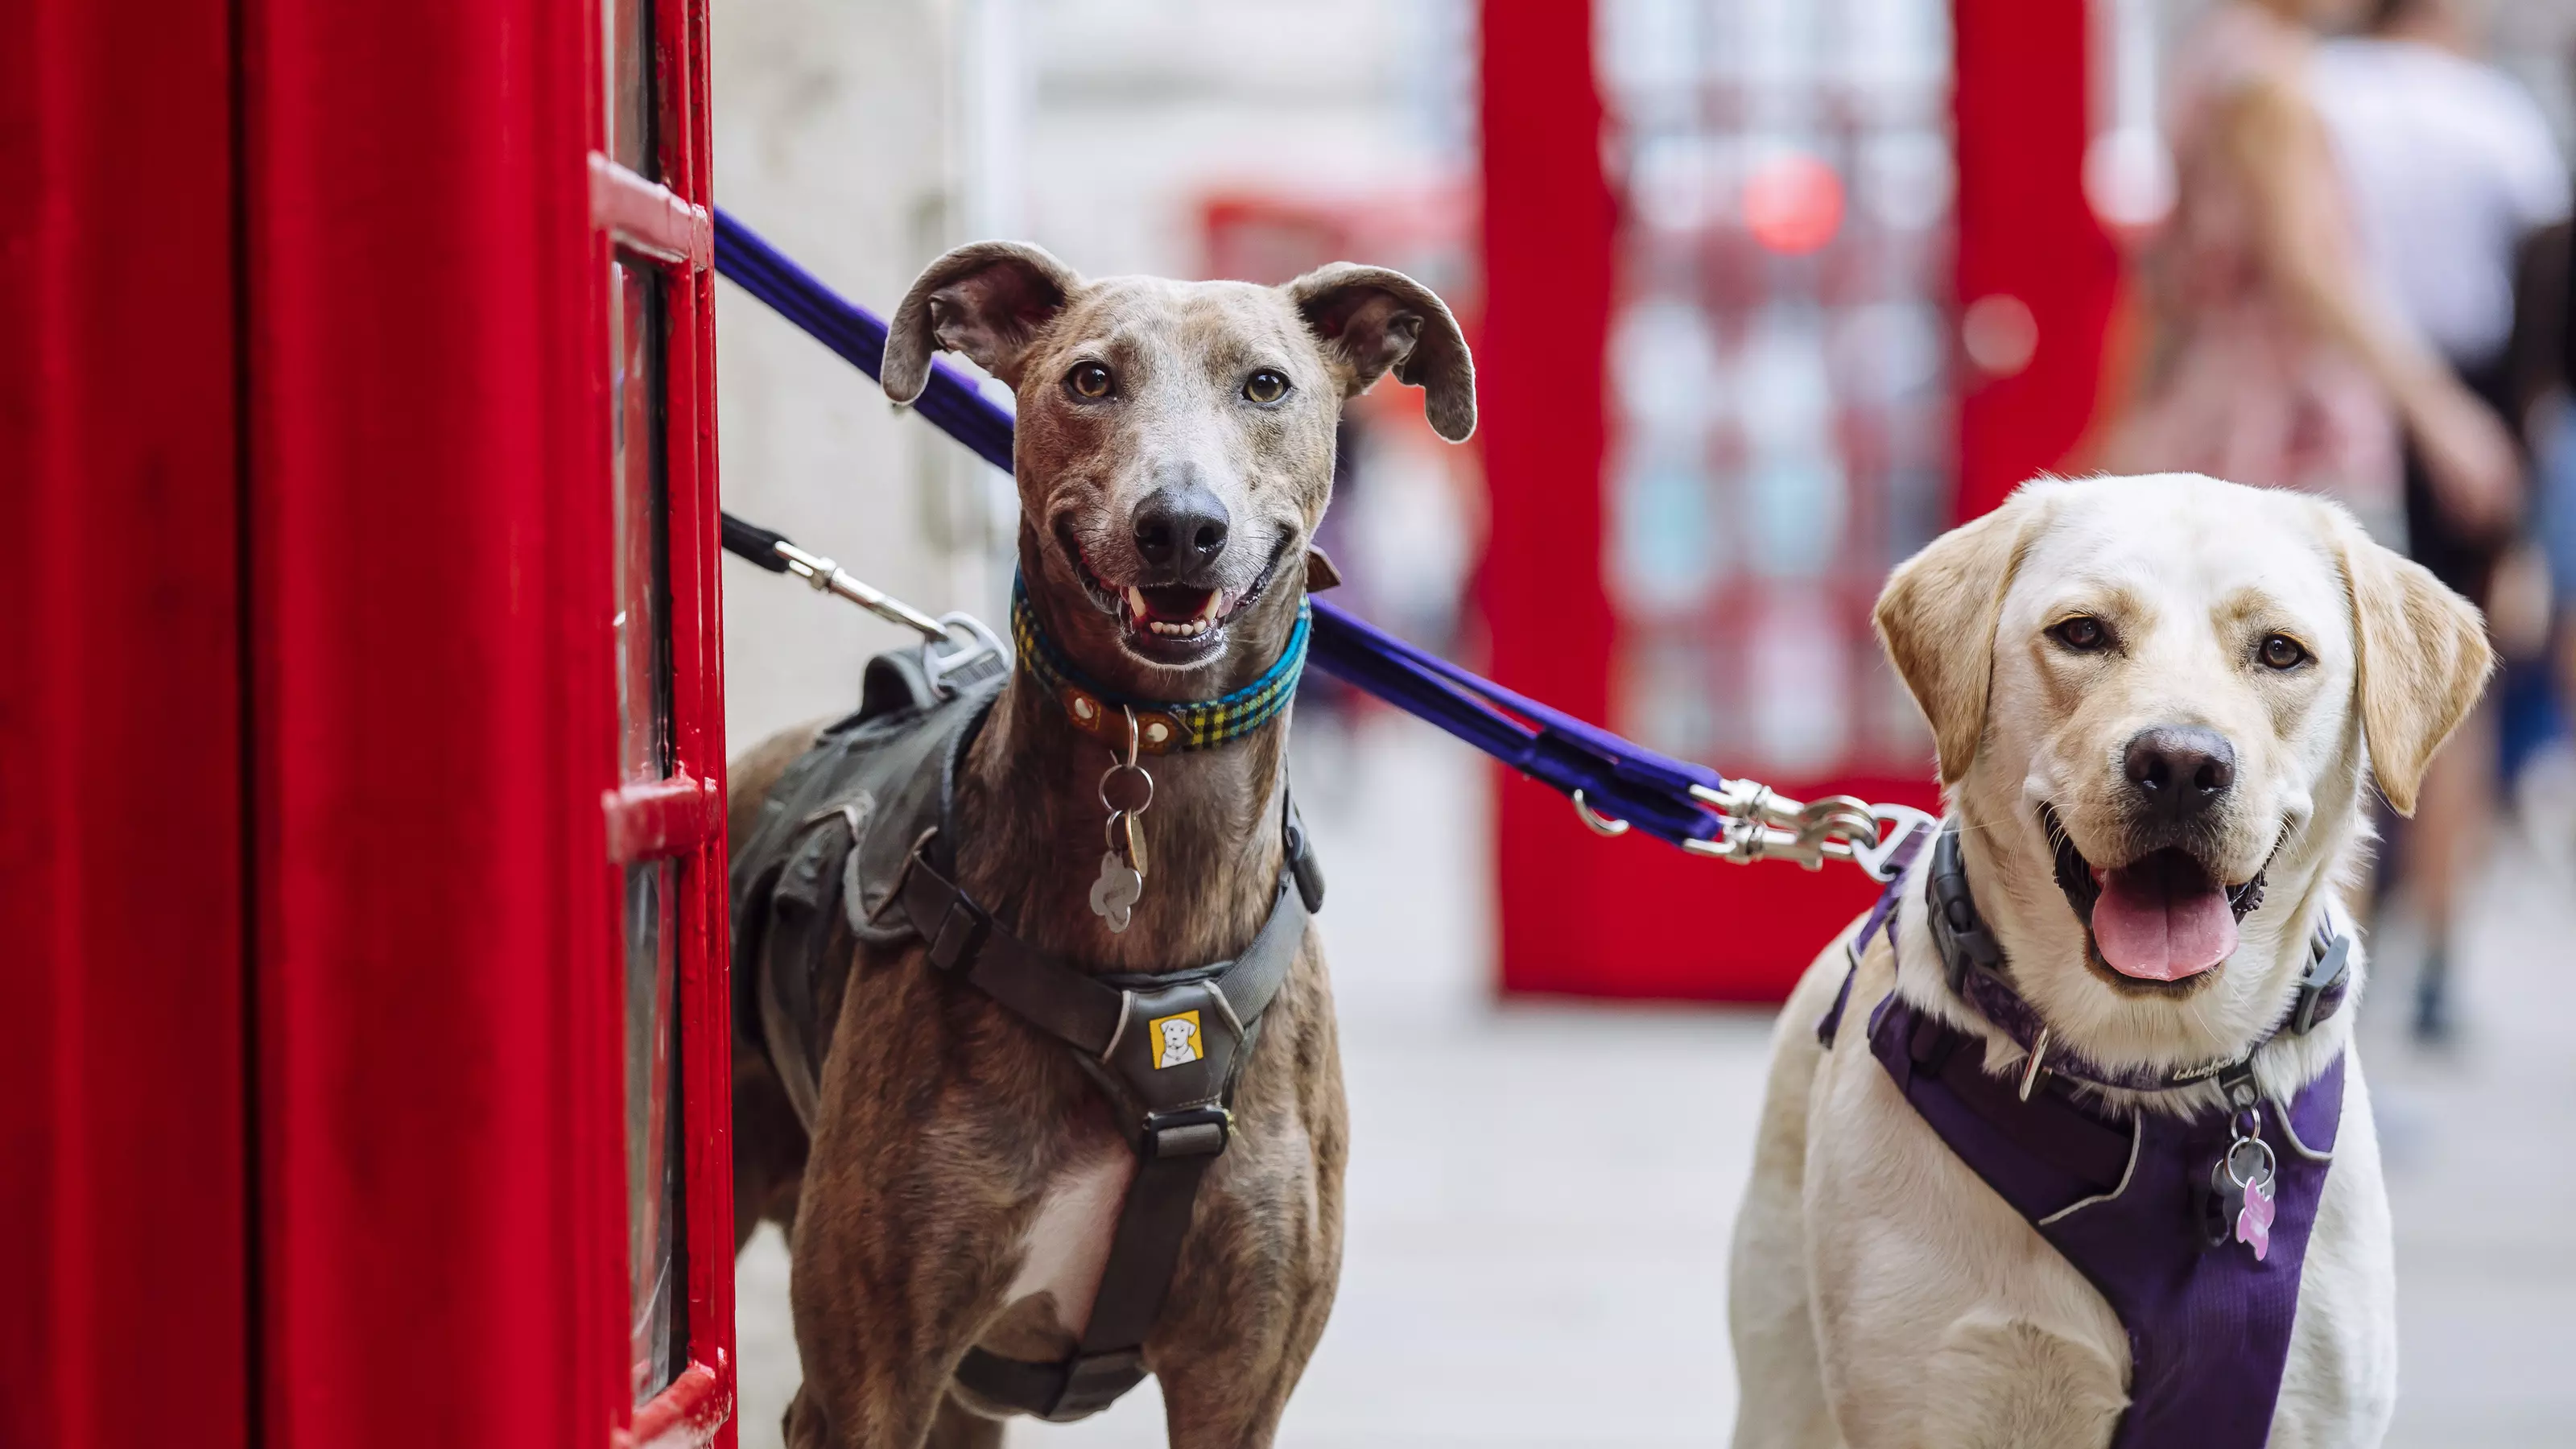 Brindle lurcher and golden Labrador side by side by a London phonebox, looking to camera